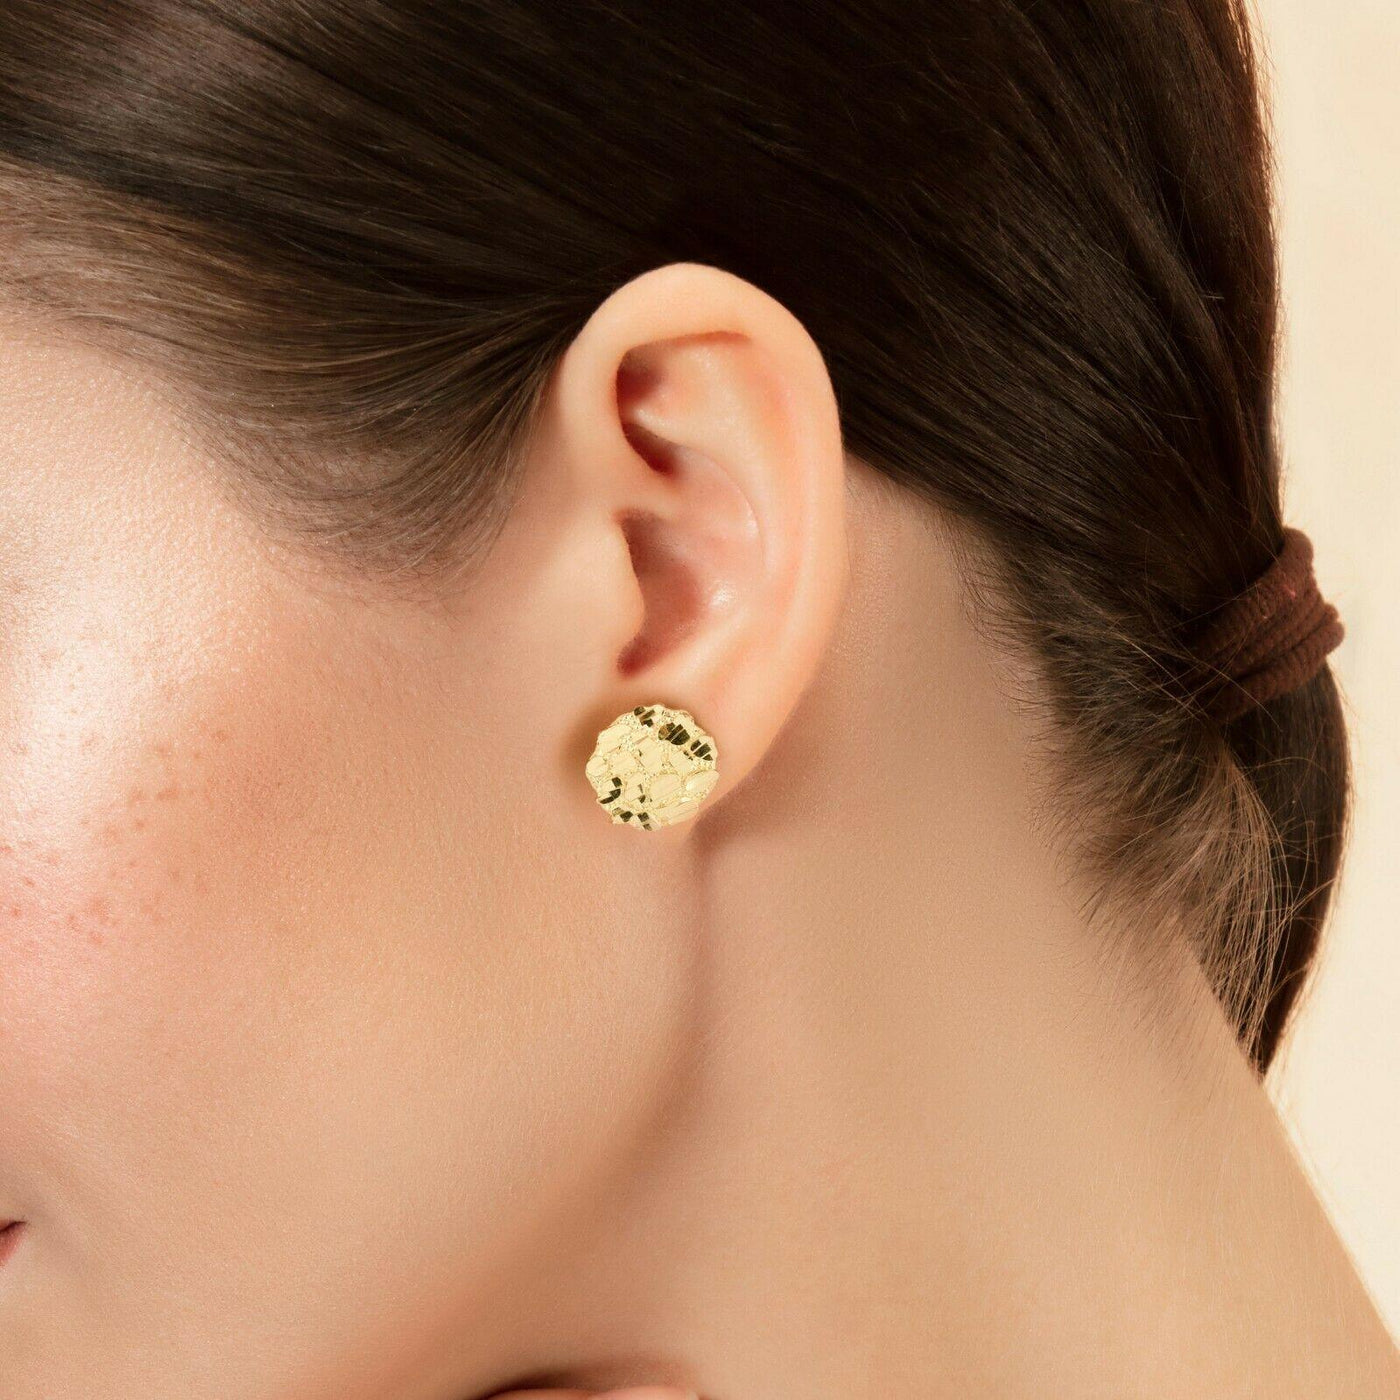 Medium Round Textured Nugget Stud Earrings Solid 10K Yellow Gold - bayamjewelry